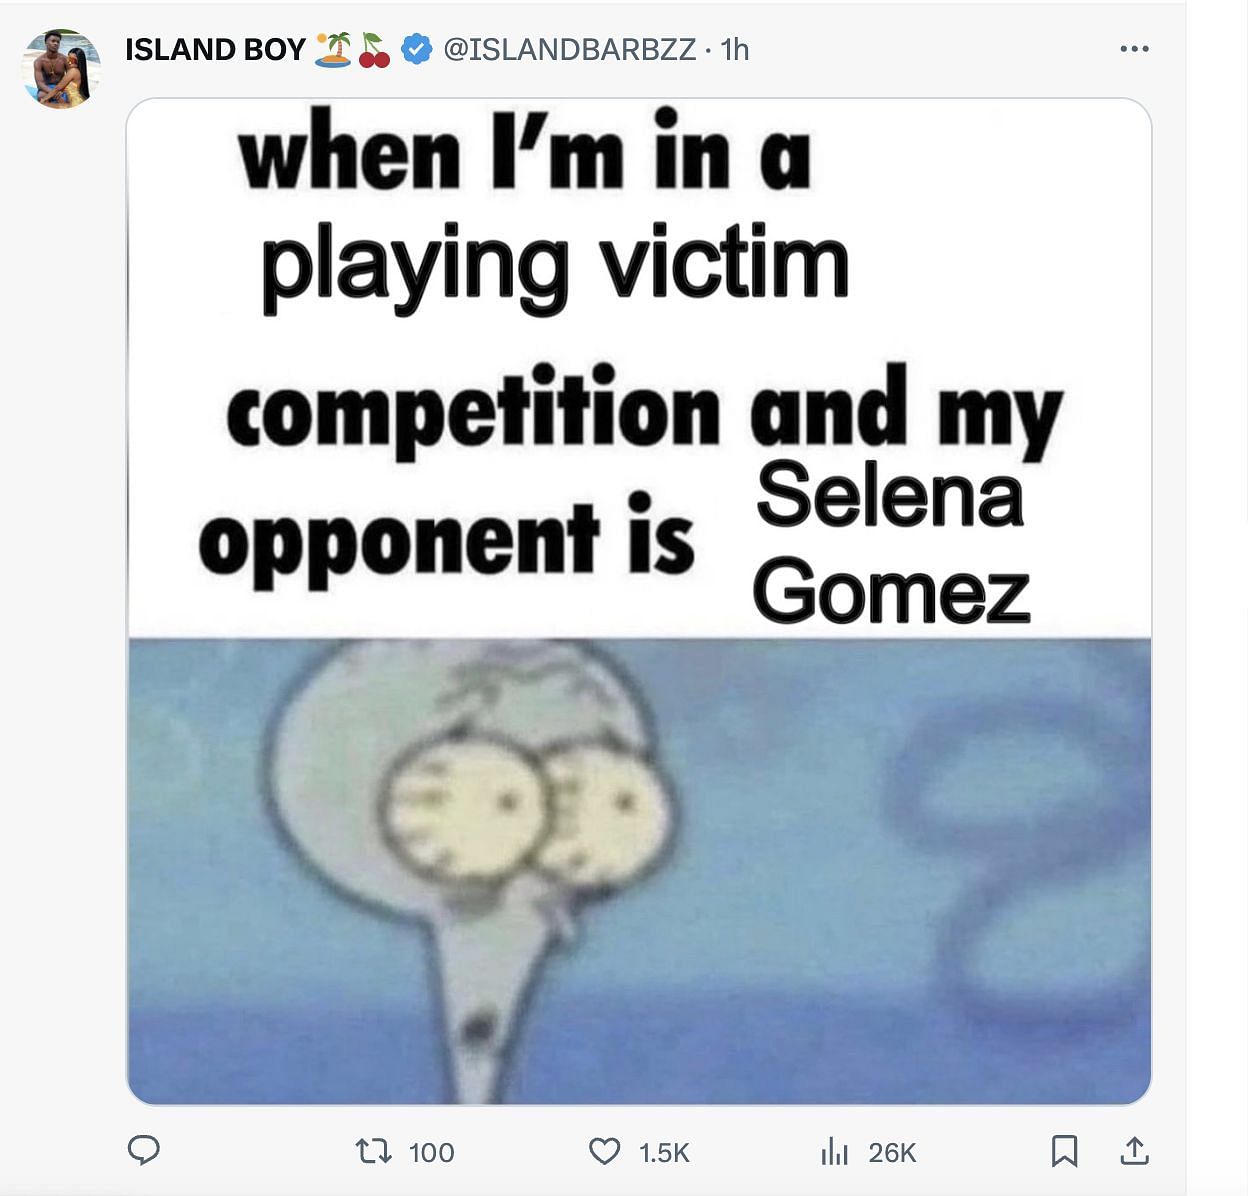 Social media users bashed Gomez for posting about permanently deleting her social media account: Reactions explored. (Image via Twitter)